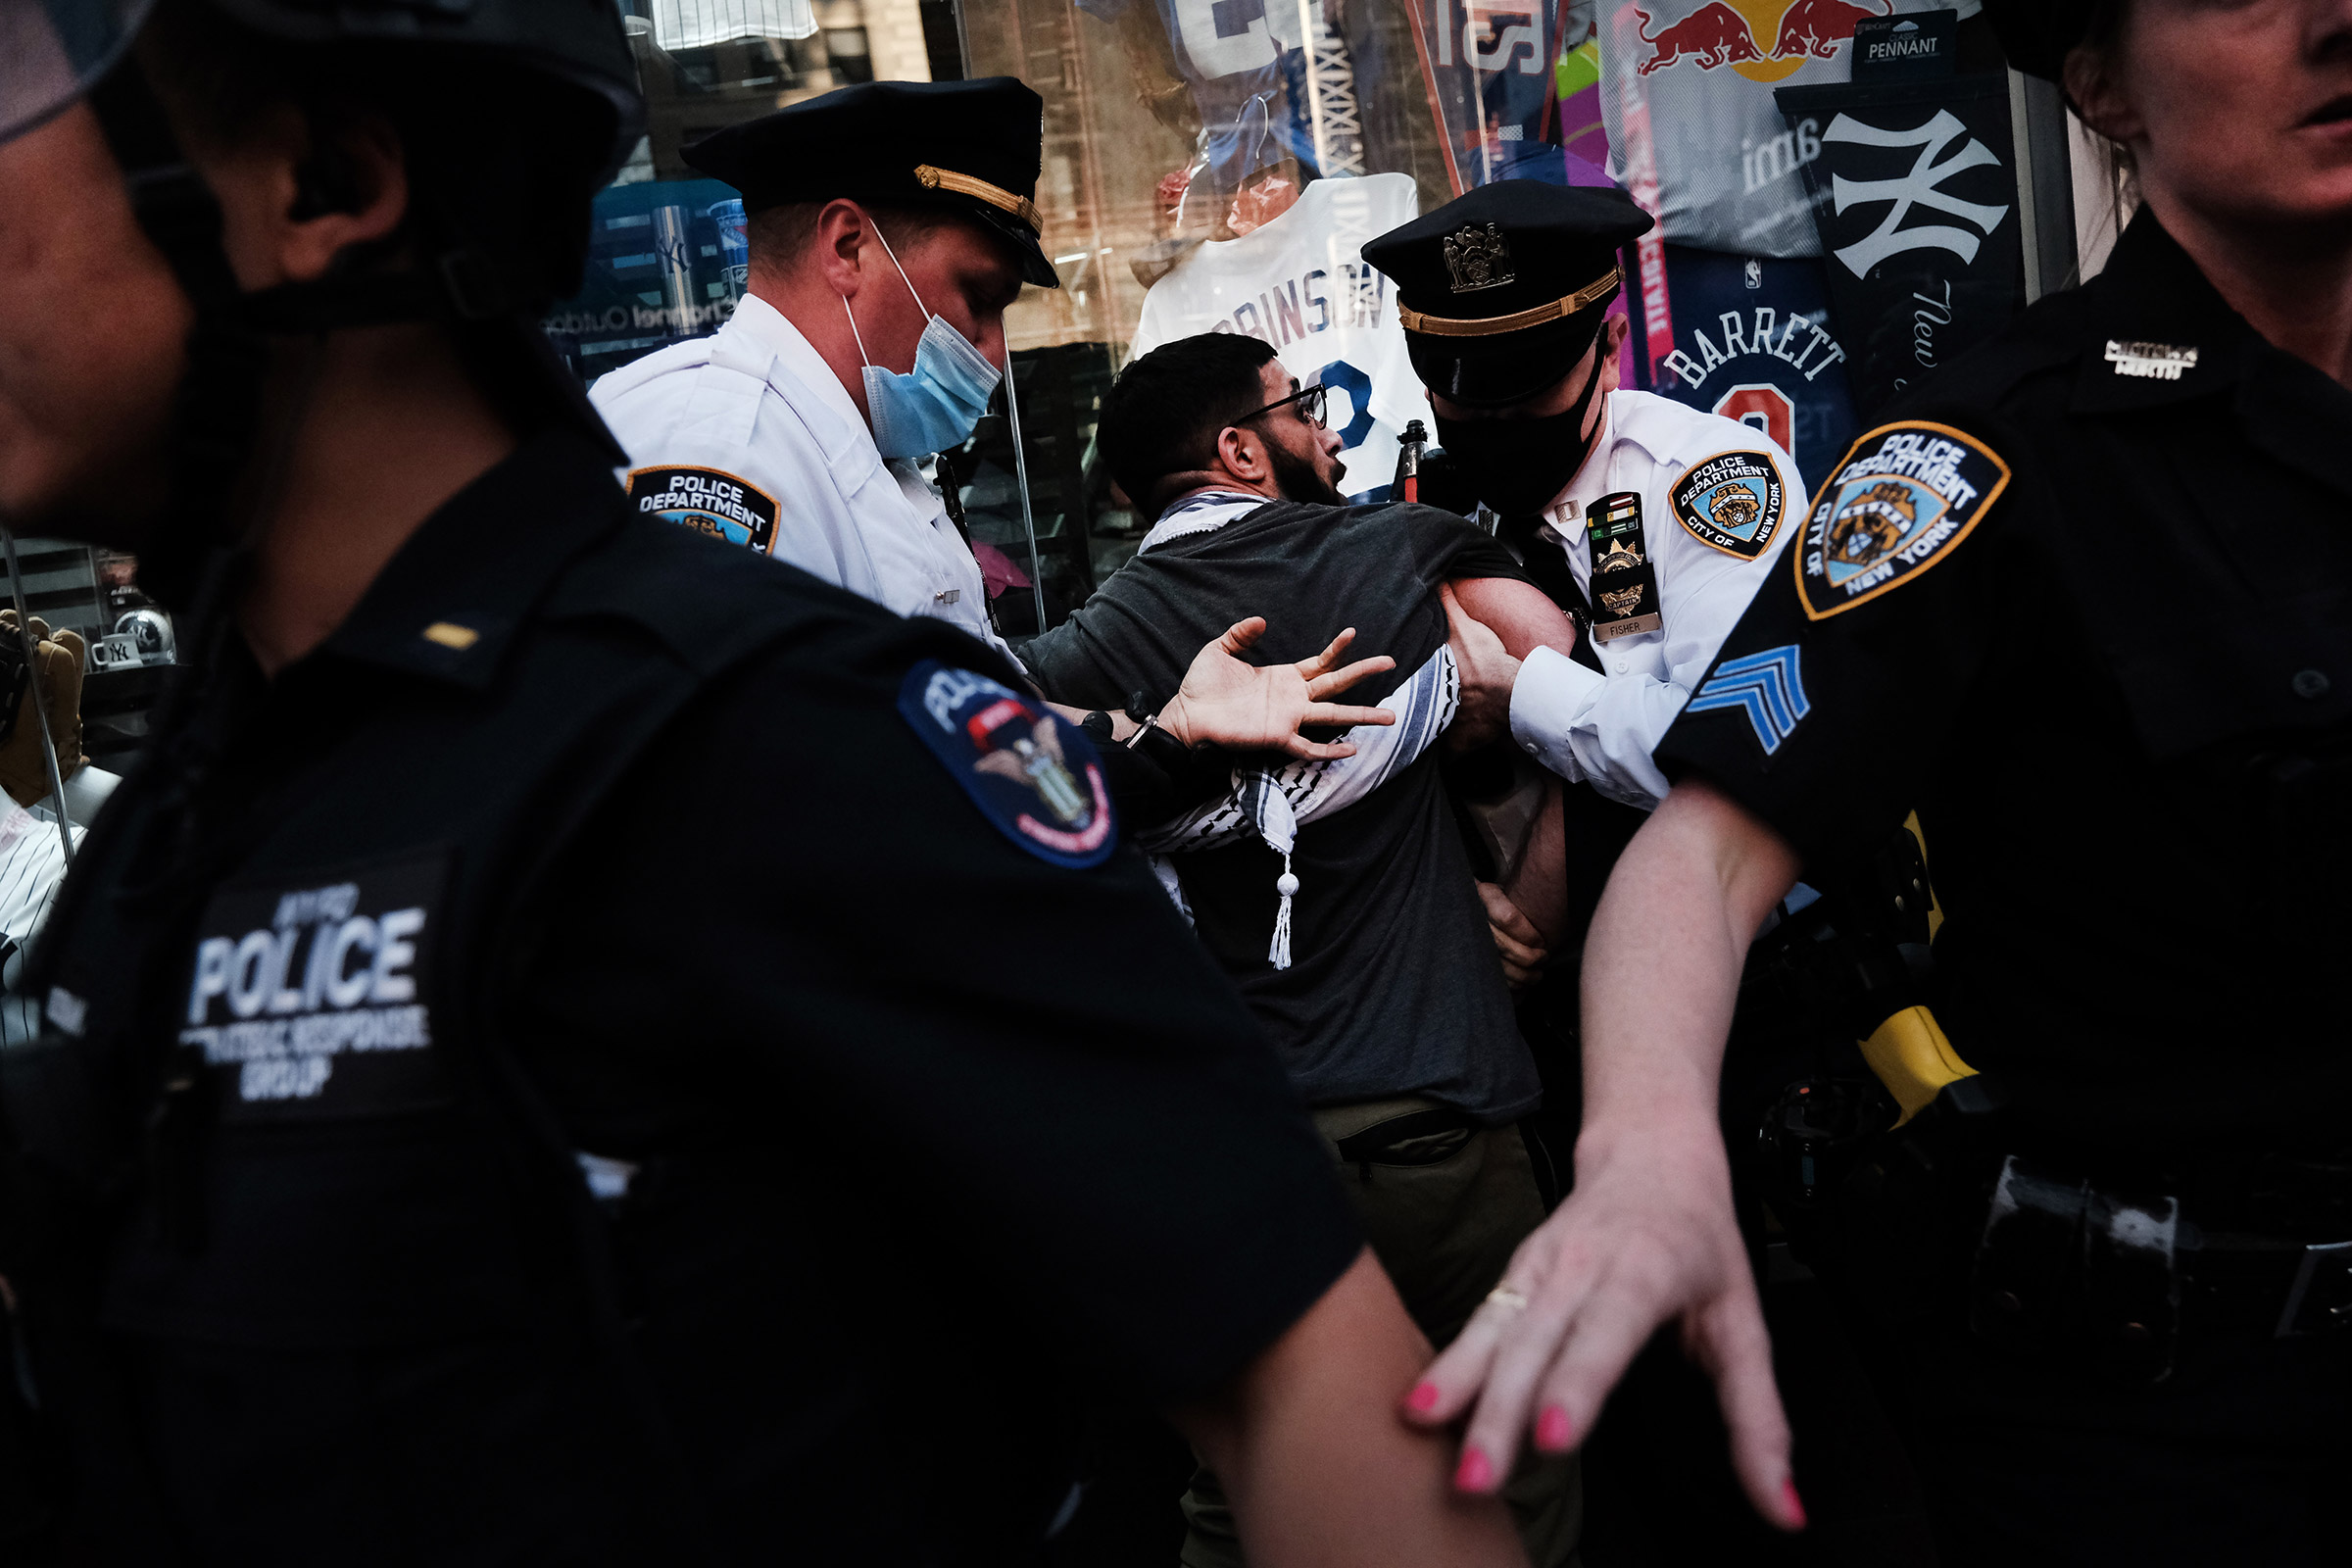 A pro-Palestinian protester is arrested during a violent clash with a group of Israel supporters and police in New York City's Times Square on May 20. (Spencer Platt—Getty Images)